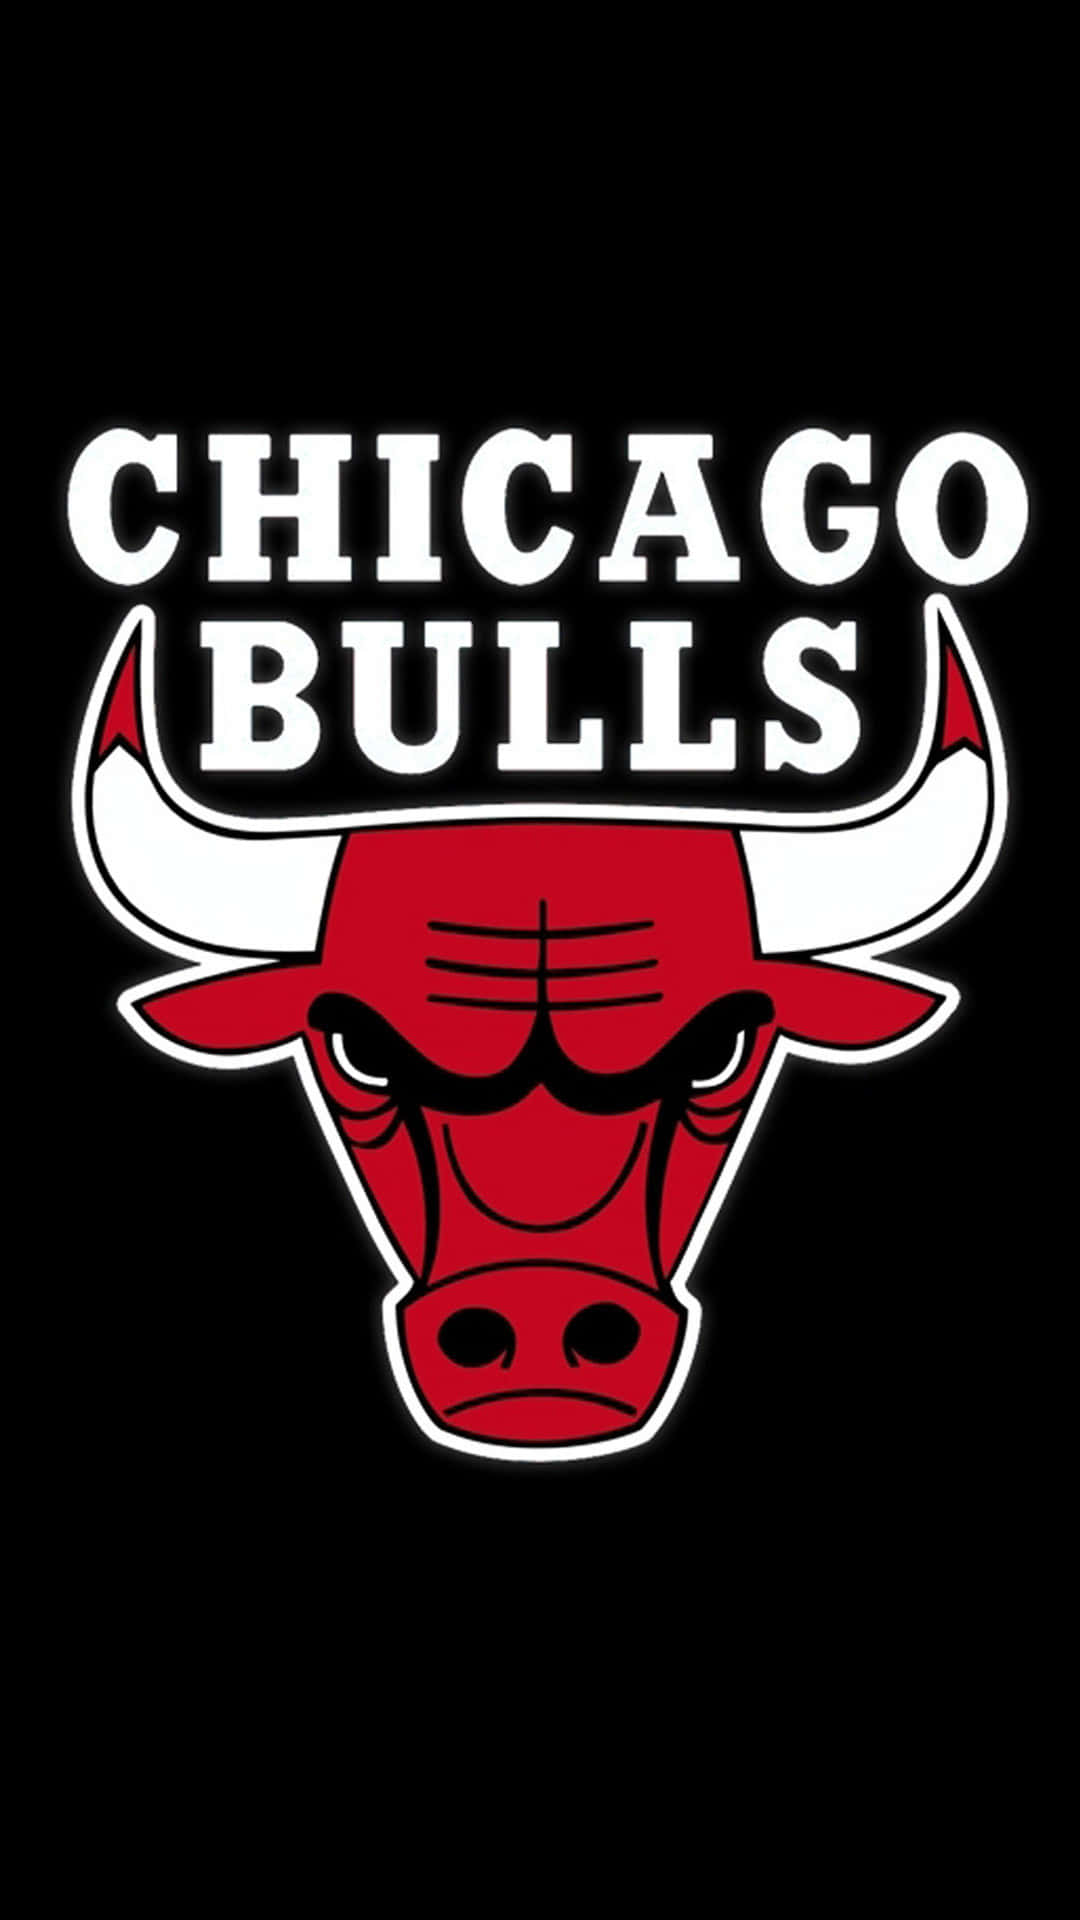 Get Ready For The Championship With The Chicago Bulls Iphone